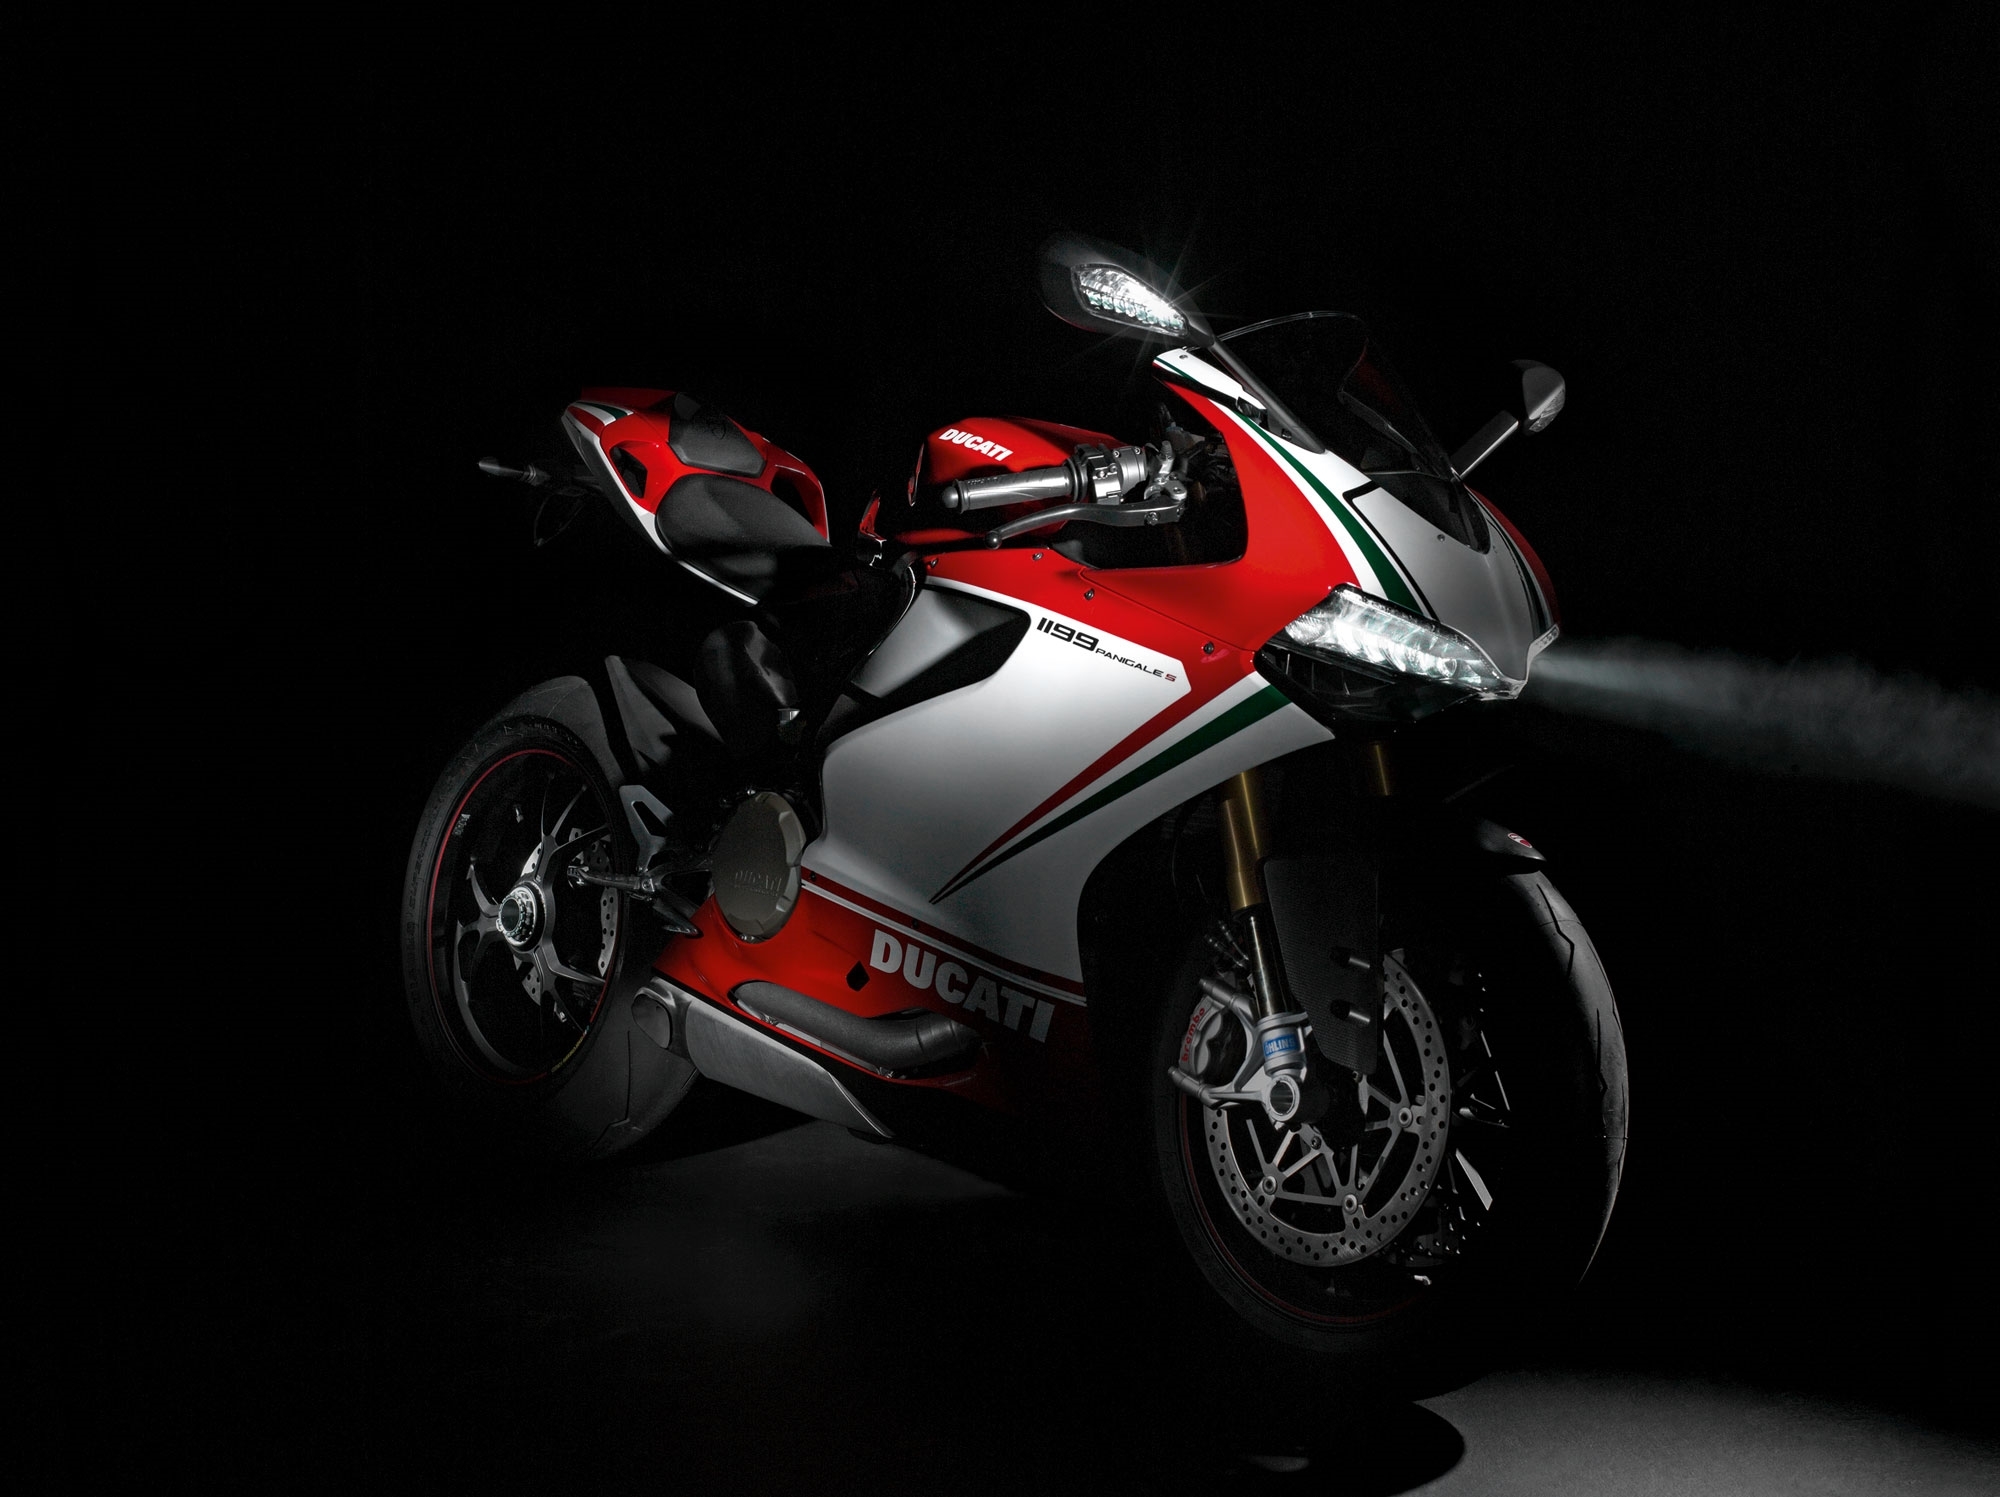 hd bikes wallpapers for android,land vehicle,vehicle,motorcycle,automotive design,superbike racing